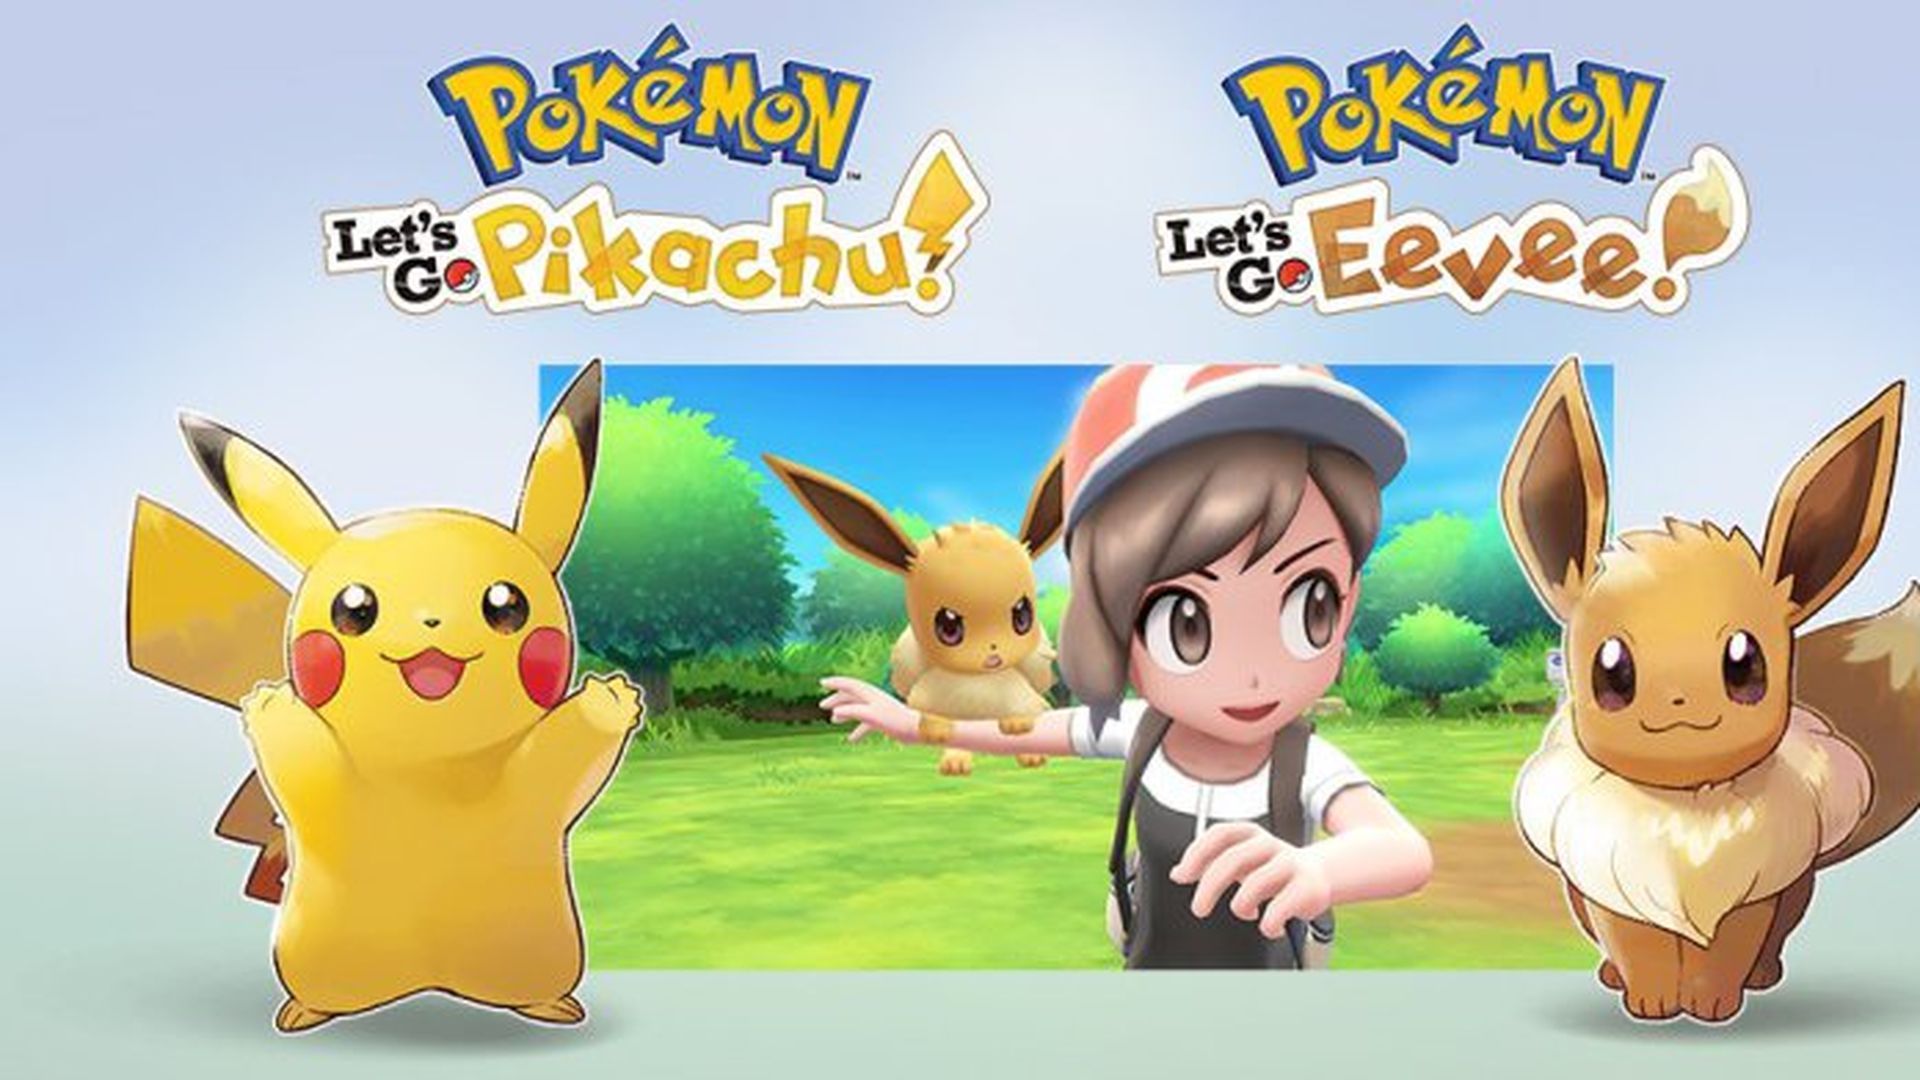 Pokemon Let's Go! Pikachu and Eevee heading to Switch